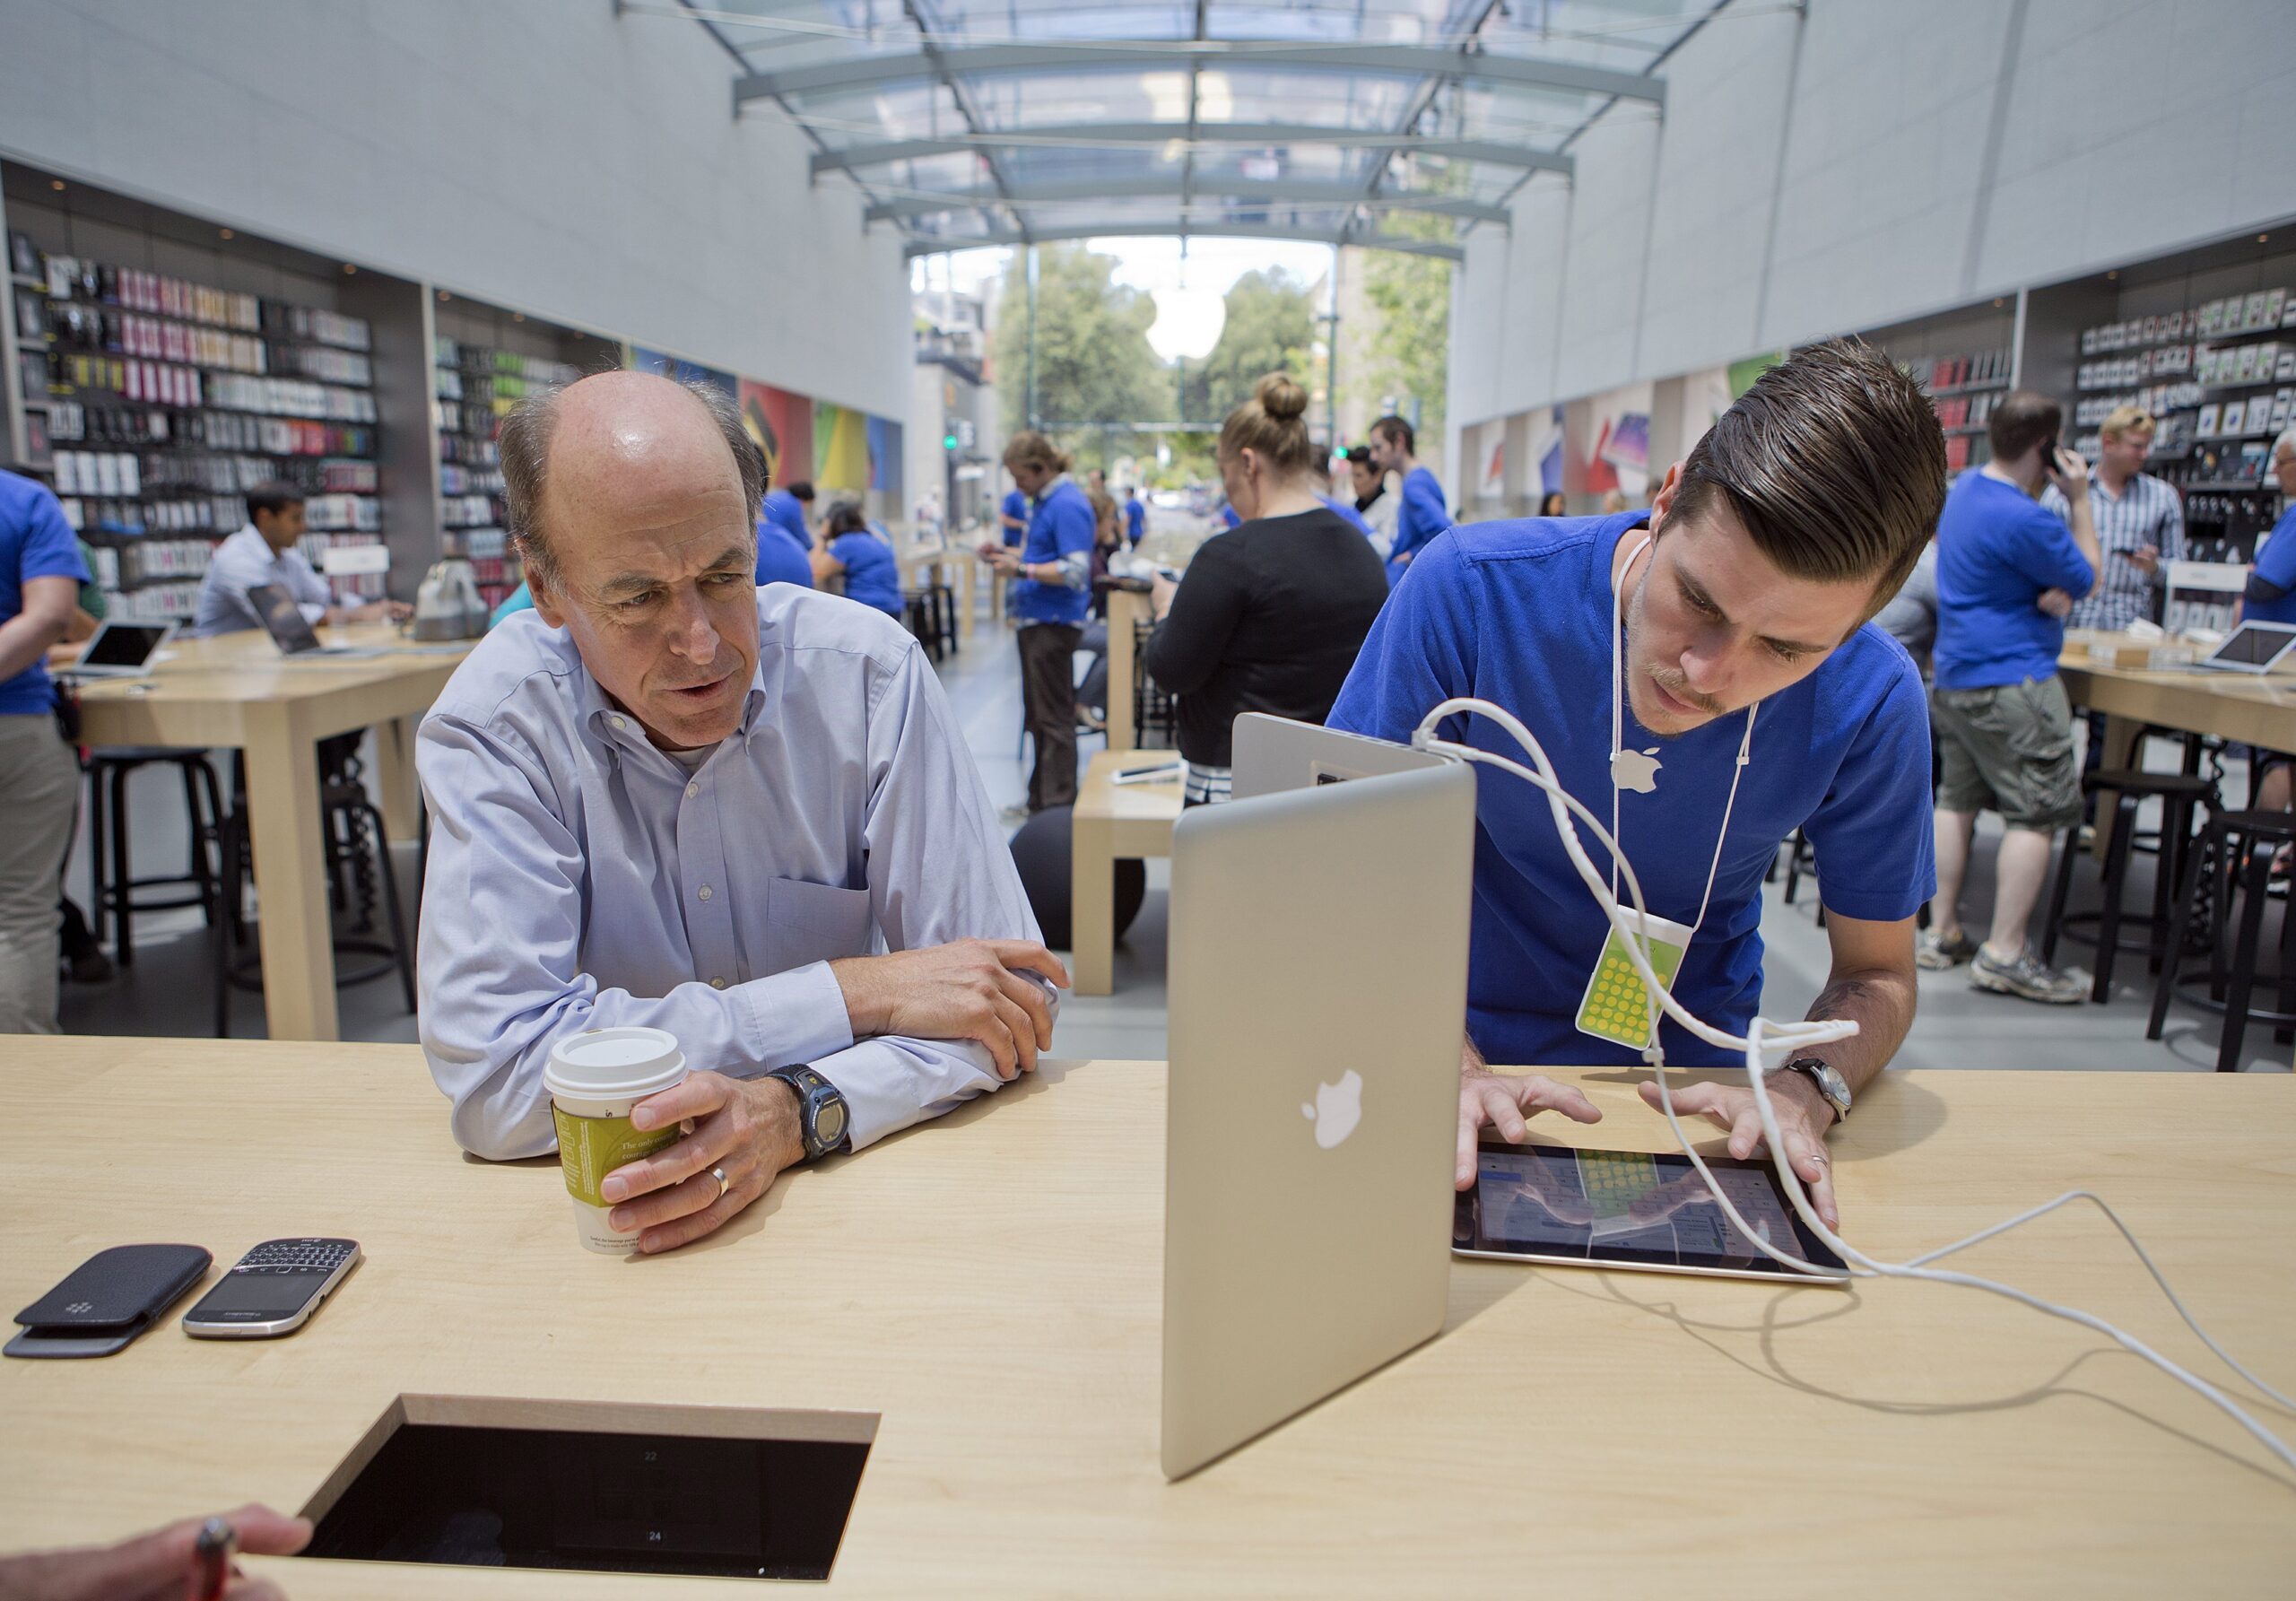 Two men work on a tablet and a laptop in an Apple store.